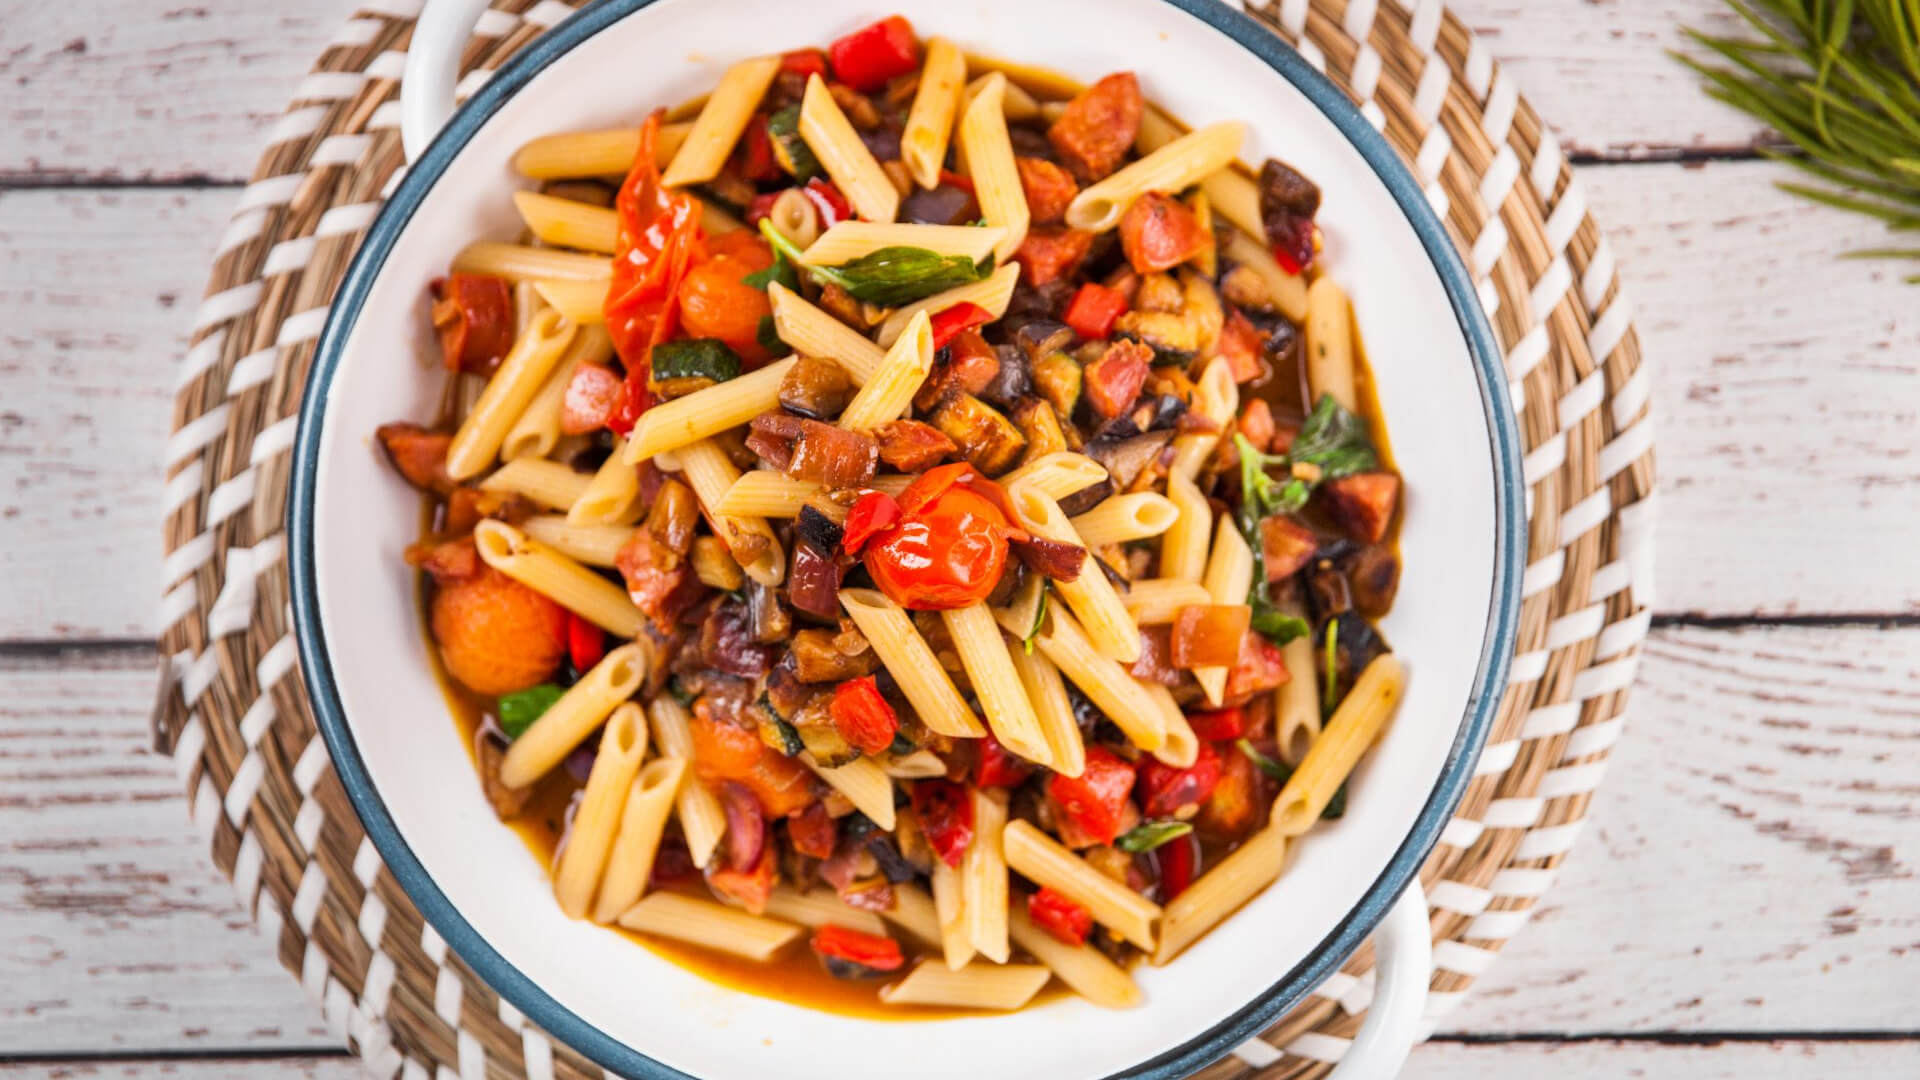 Penne with Roasted Cherry Tomato Sauce Recipe | Roasted Cherry Tomato Pasta